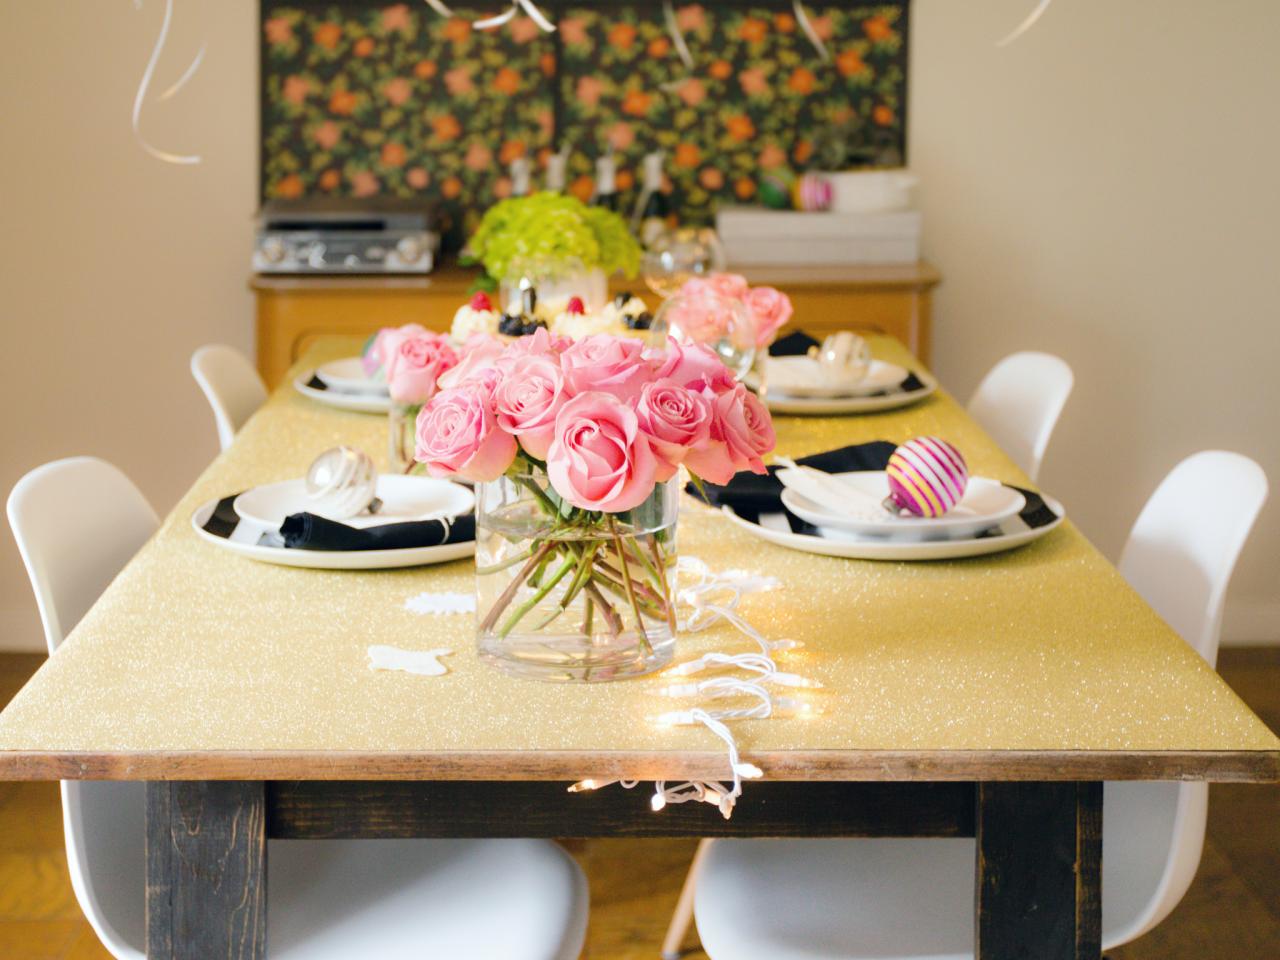 Original_Jeanine-Hays-new-years-eve-upcycle-wrapping-paper-tablecloth_h.jpg.rend.hgtvcom.1280.960.jpg